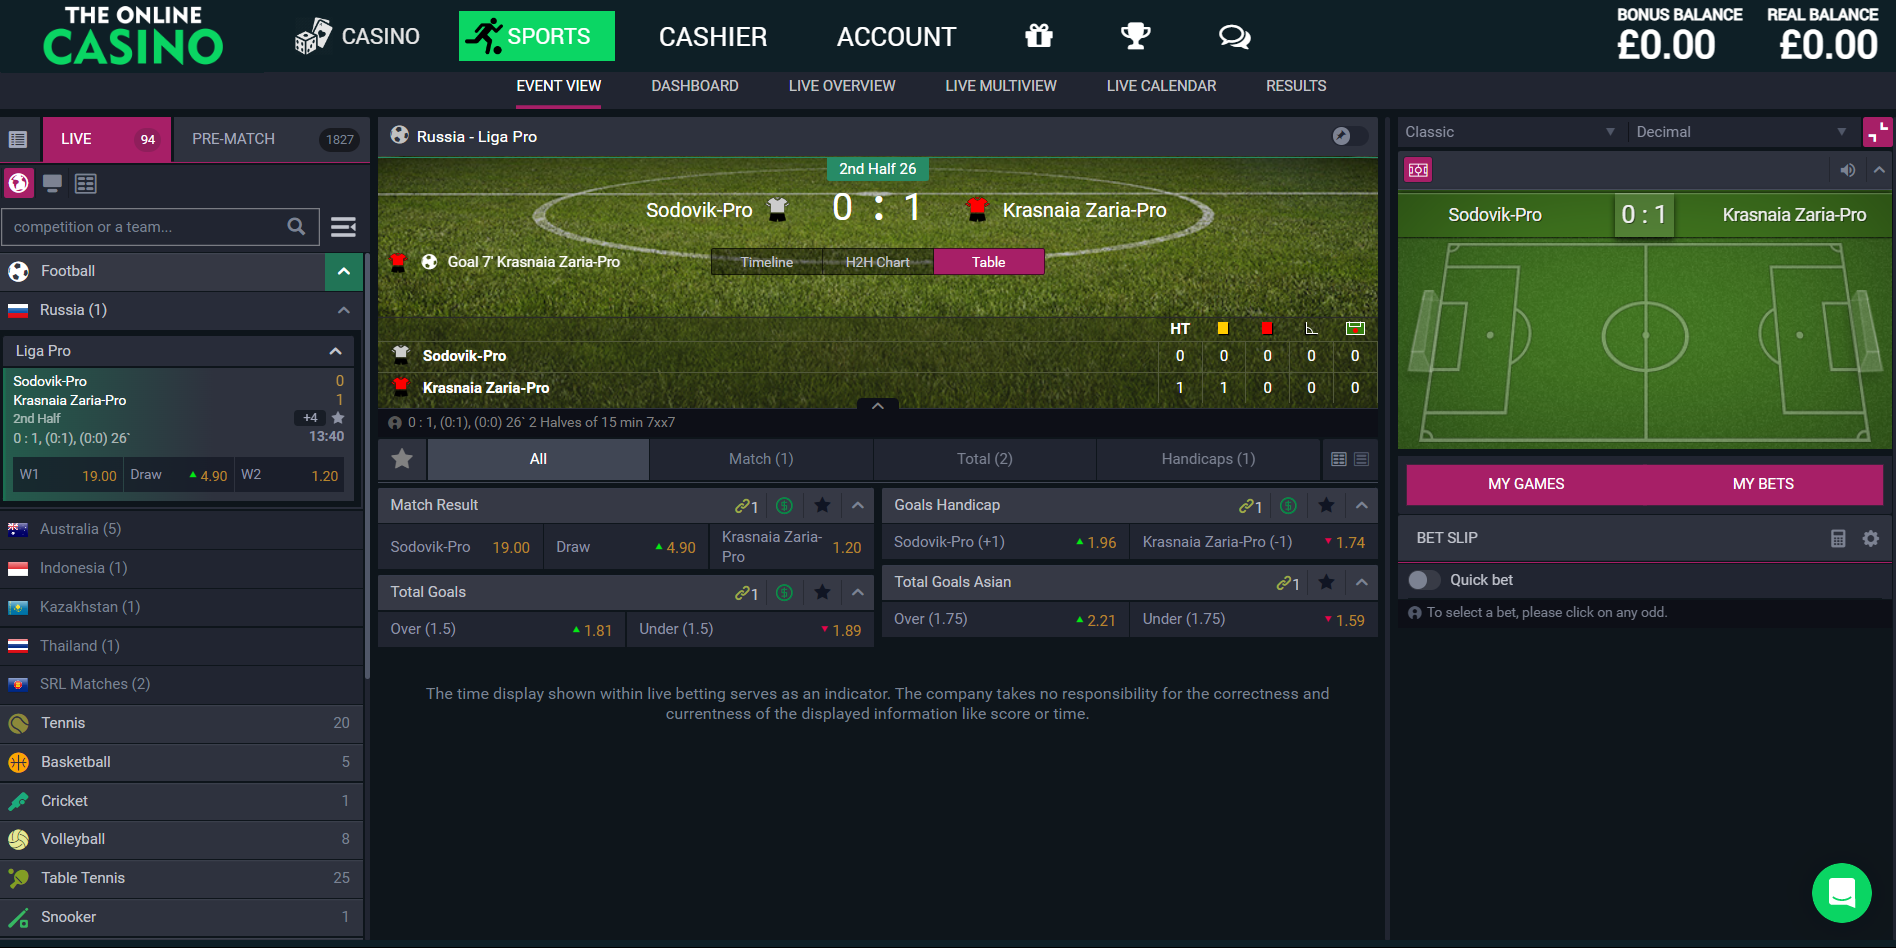 TheOnlineCasino live bet page.